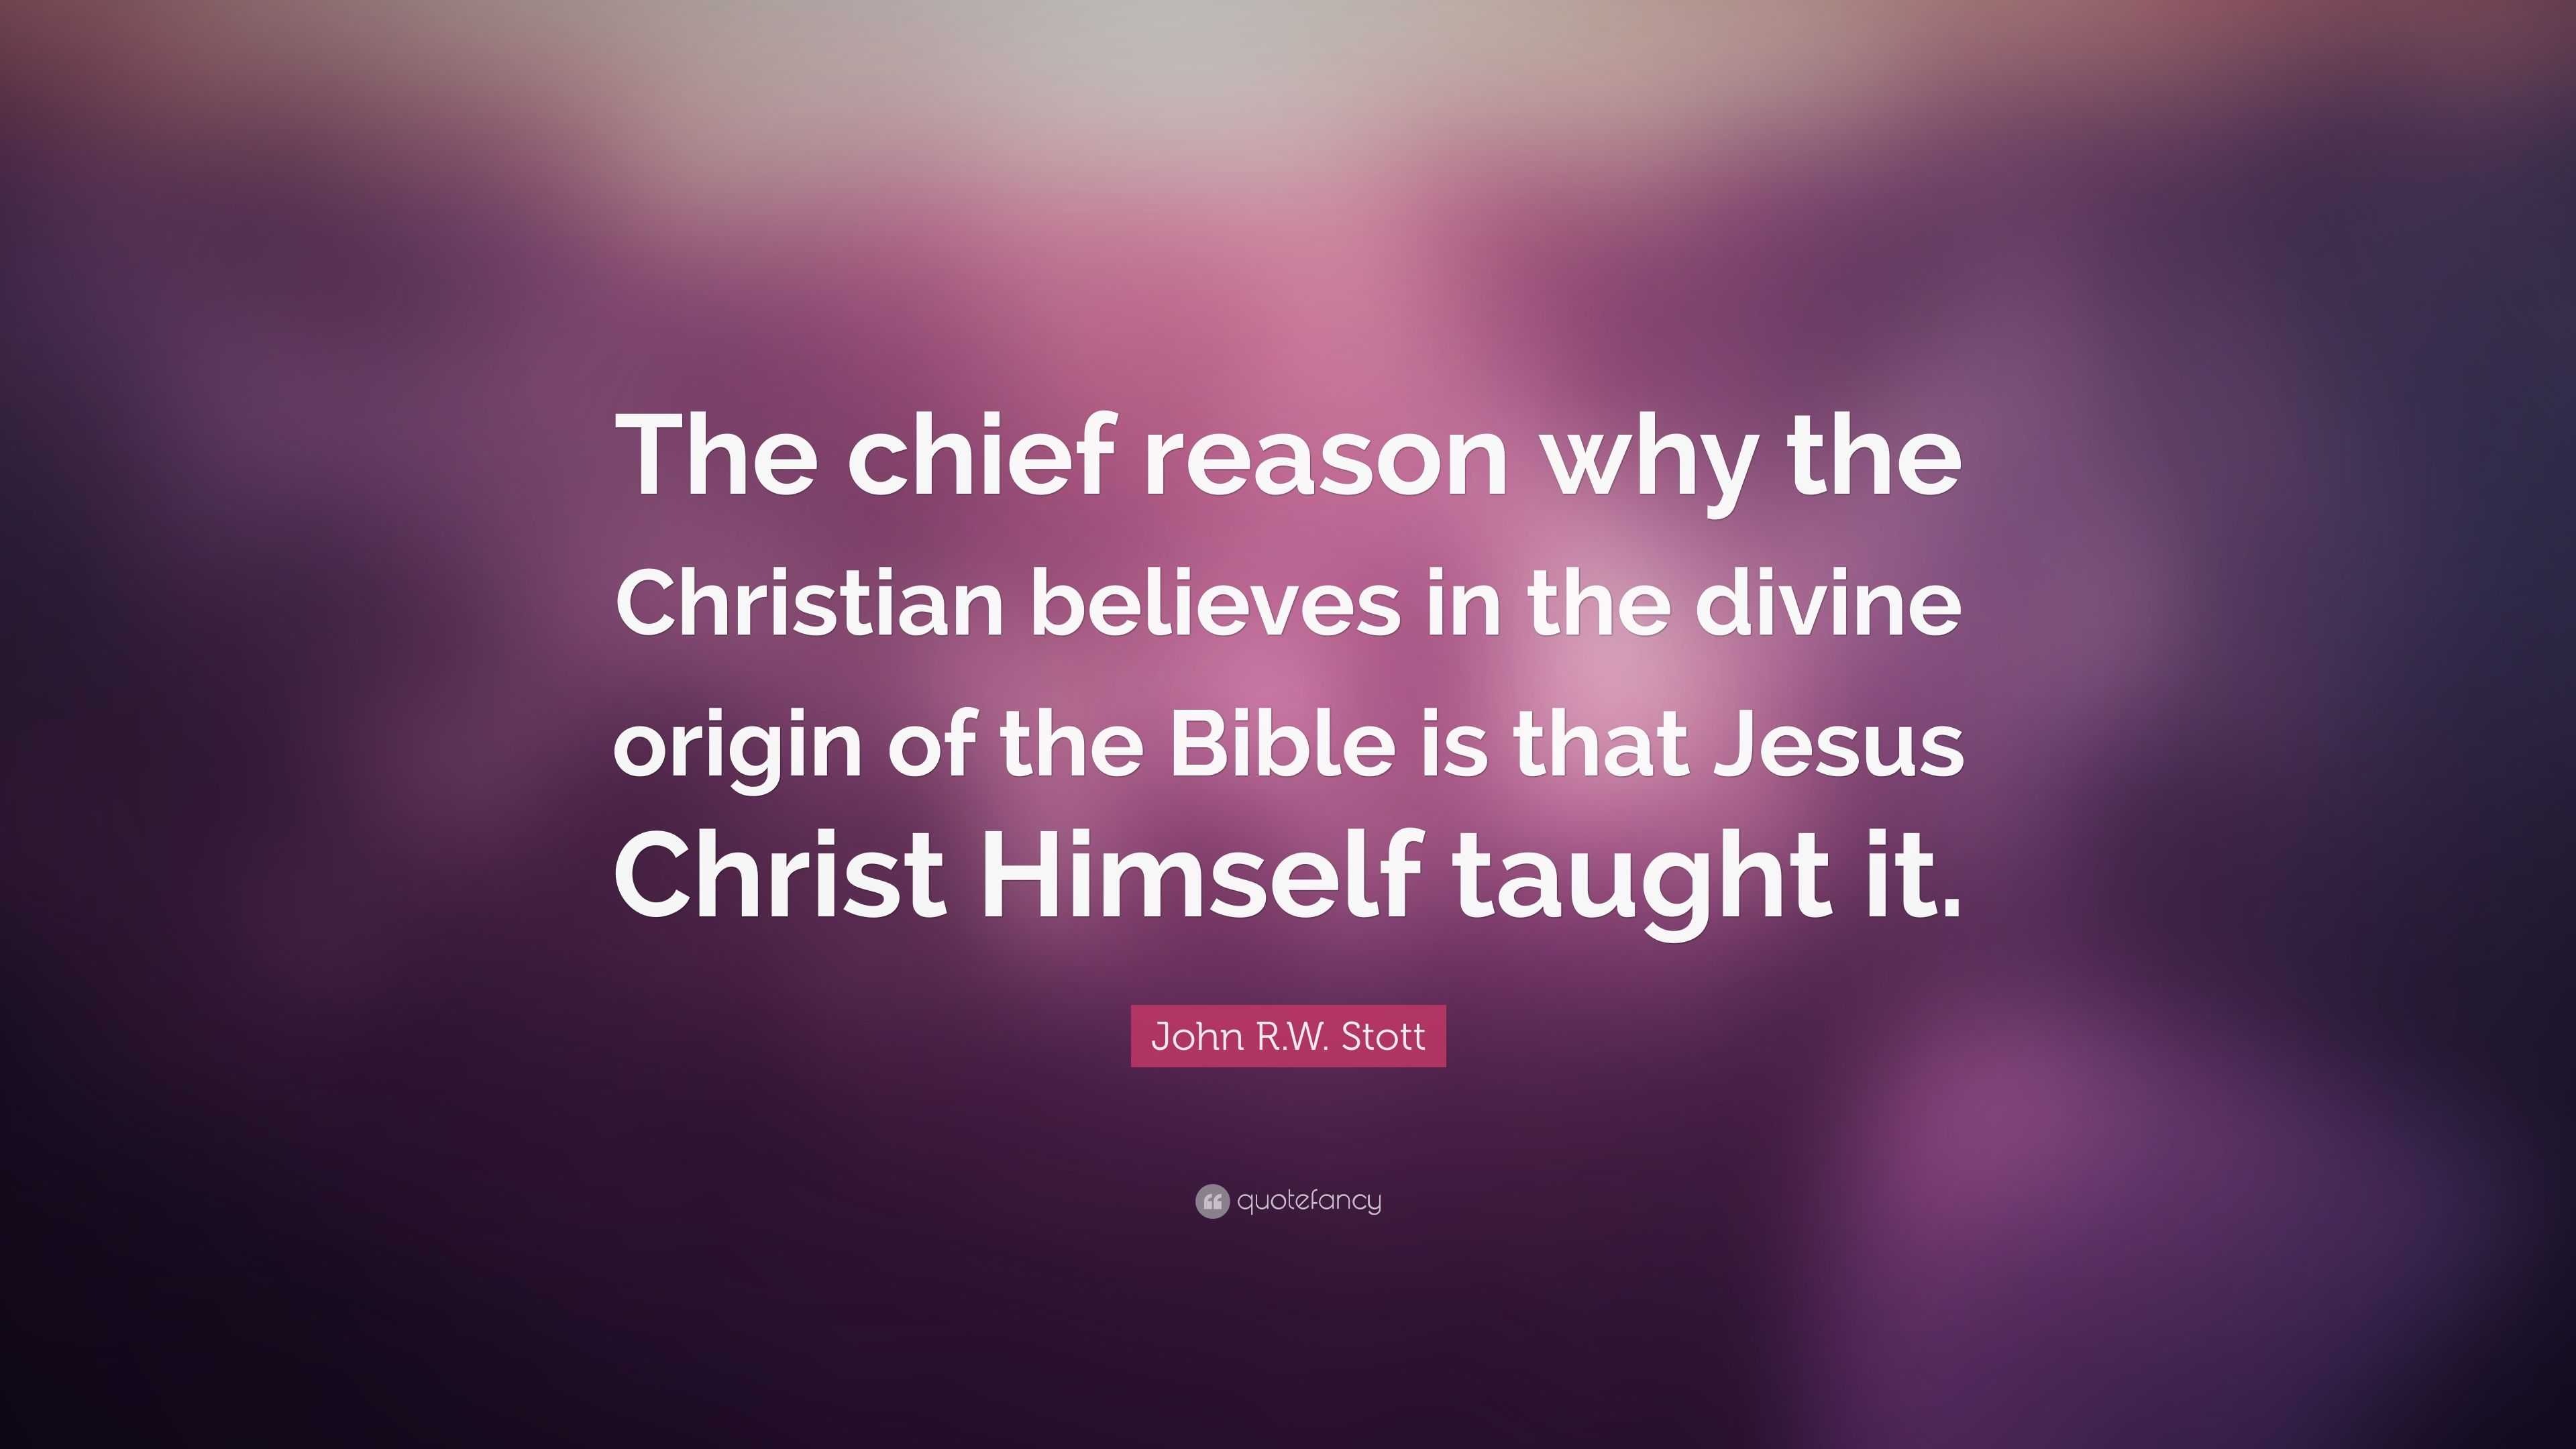 John R.W. Stott Quote: “The chief reason why the Christian believes in ...